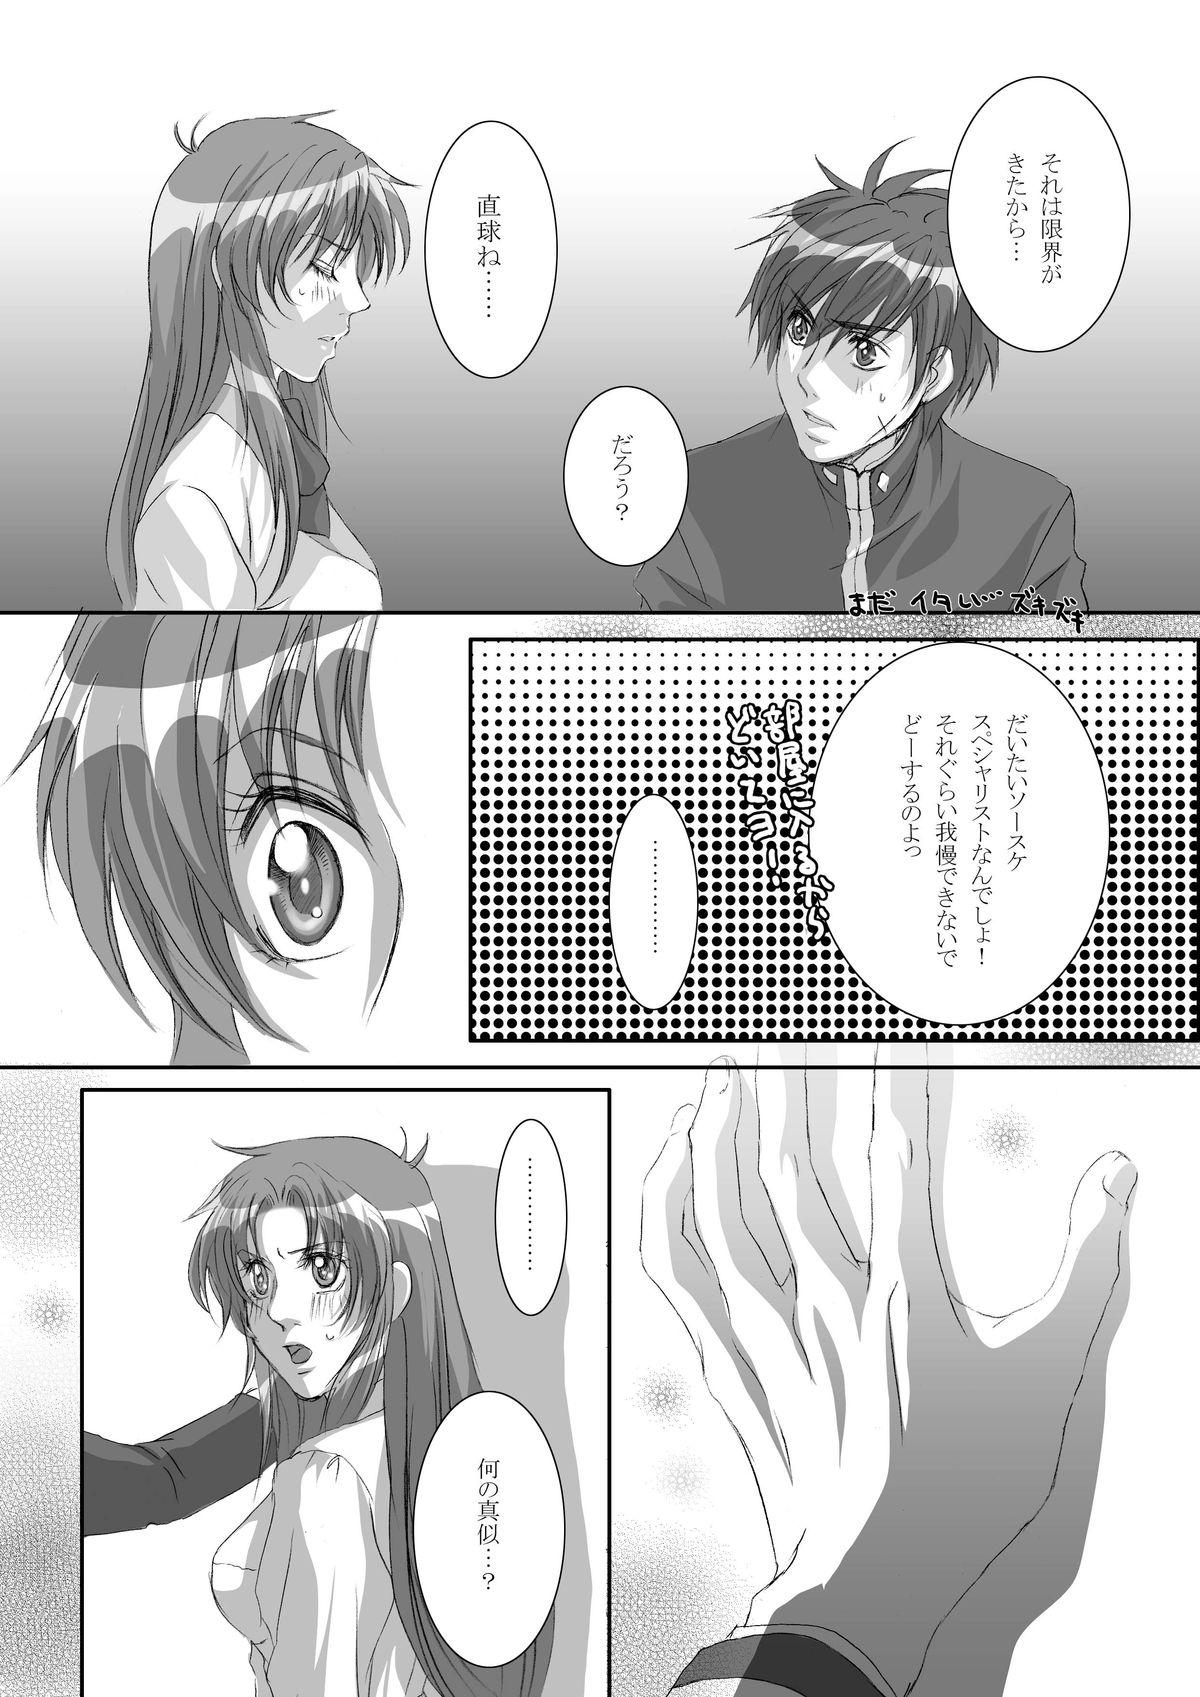 Punished Anjel Seven A7 - Full metal panic Young Men - Page 7